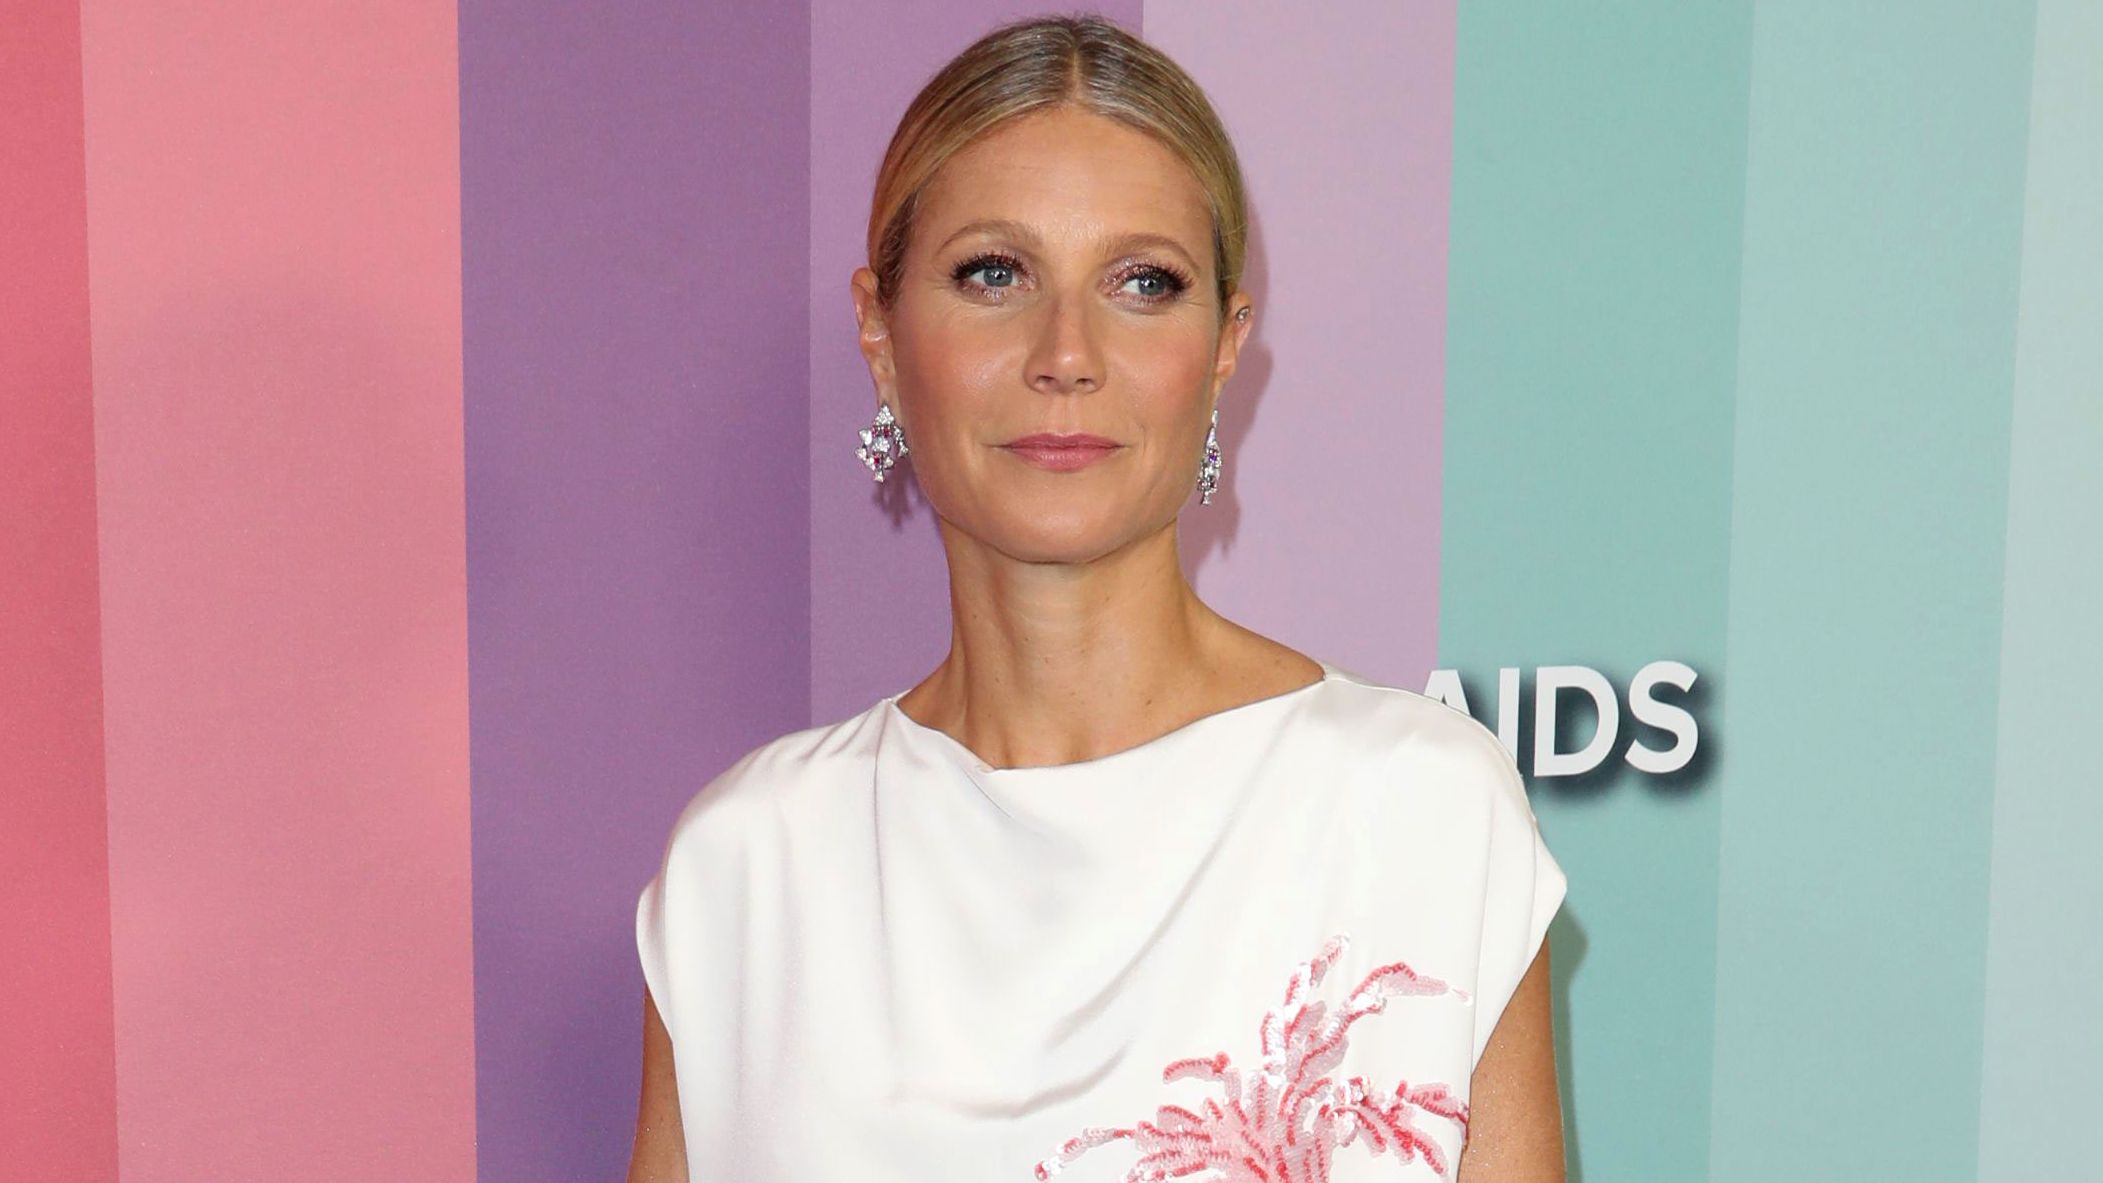 Gwyneth Paltrow revealed she had Covid-19 early in the pandemic. (Photo by Matt Baron/Shutterstock)
